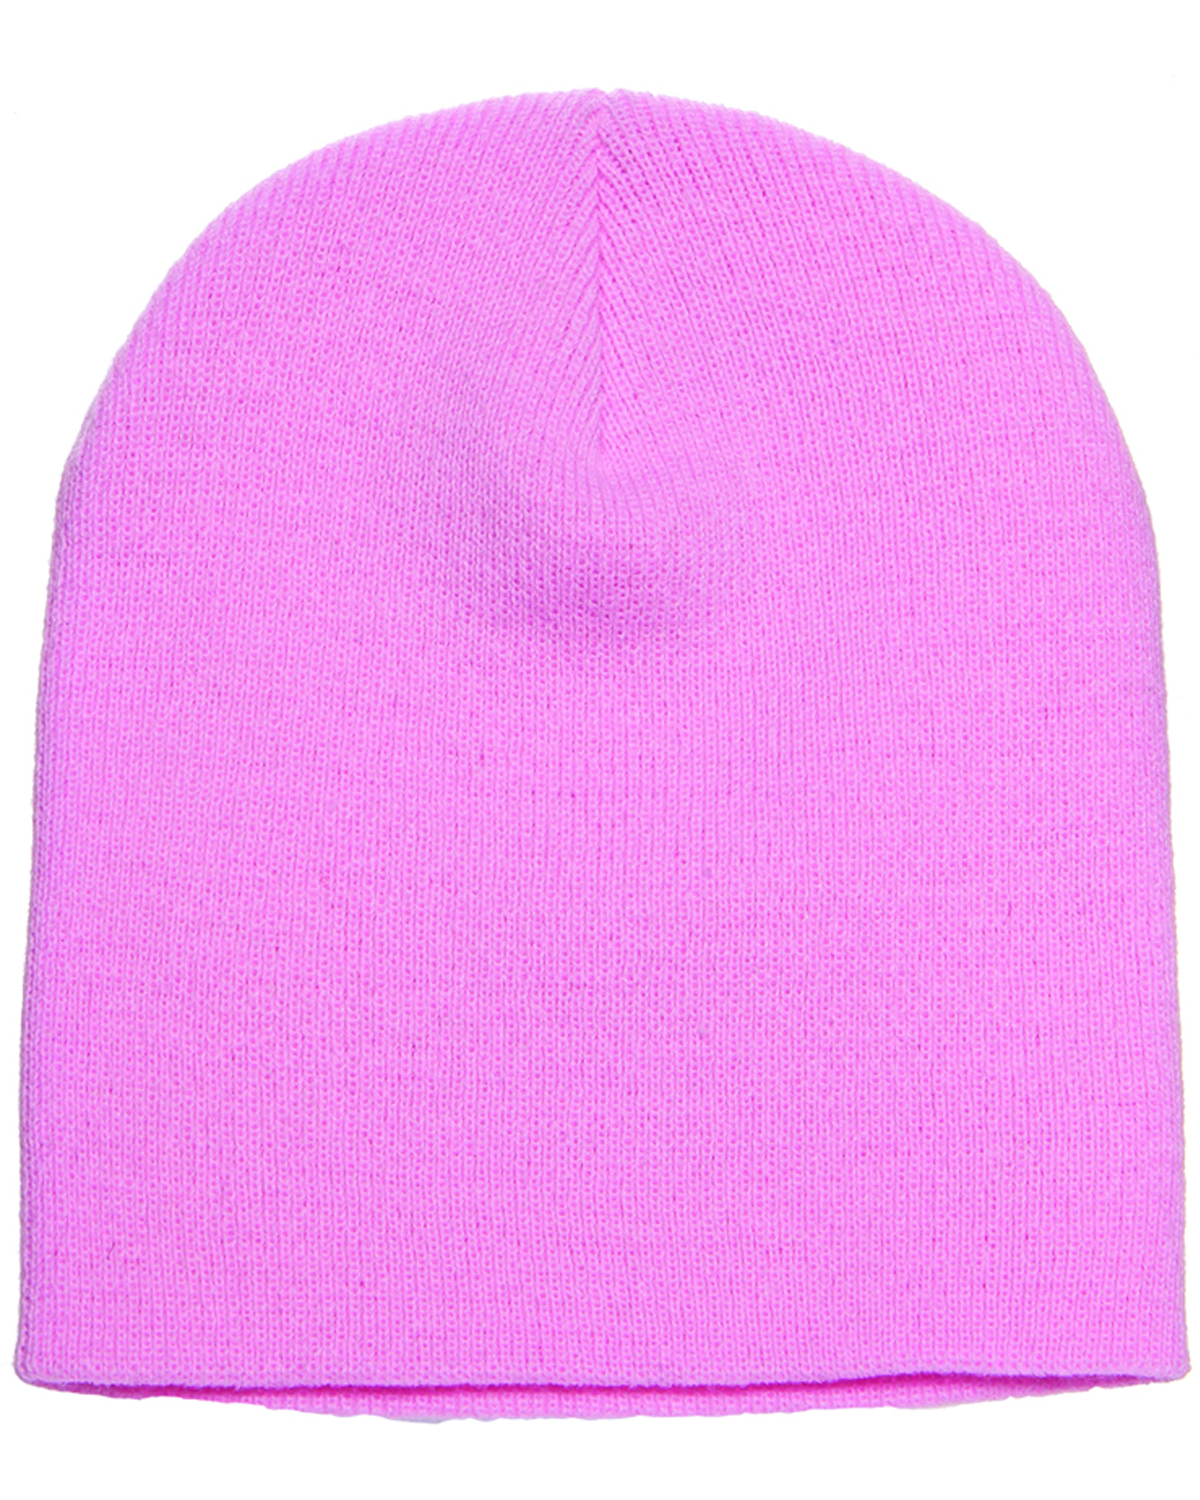 Yupoong 1500 | Adult Knit Beanie | ShirtSpace